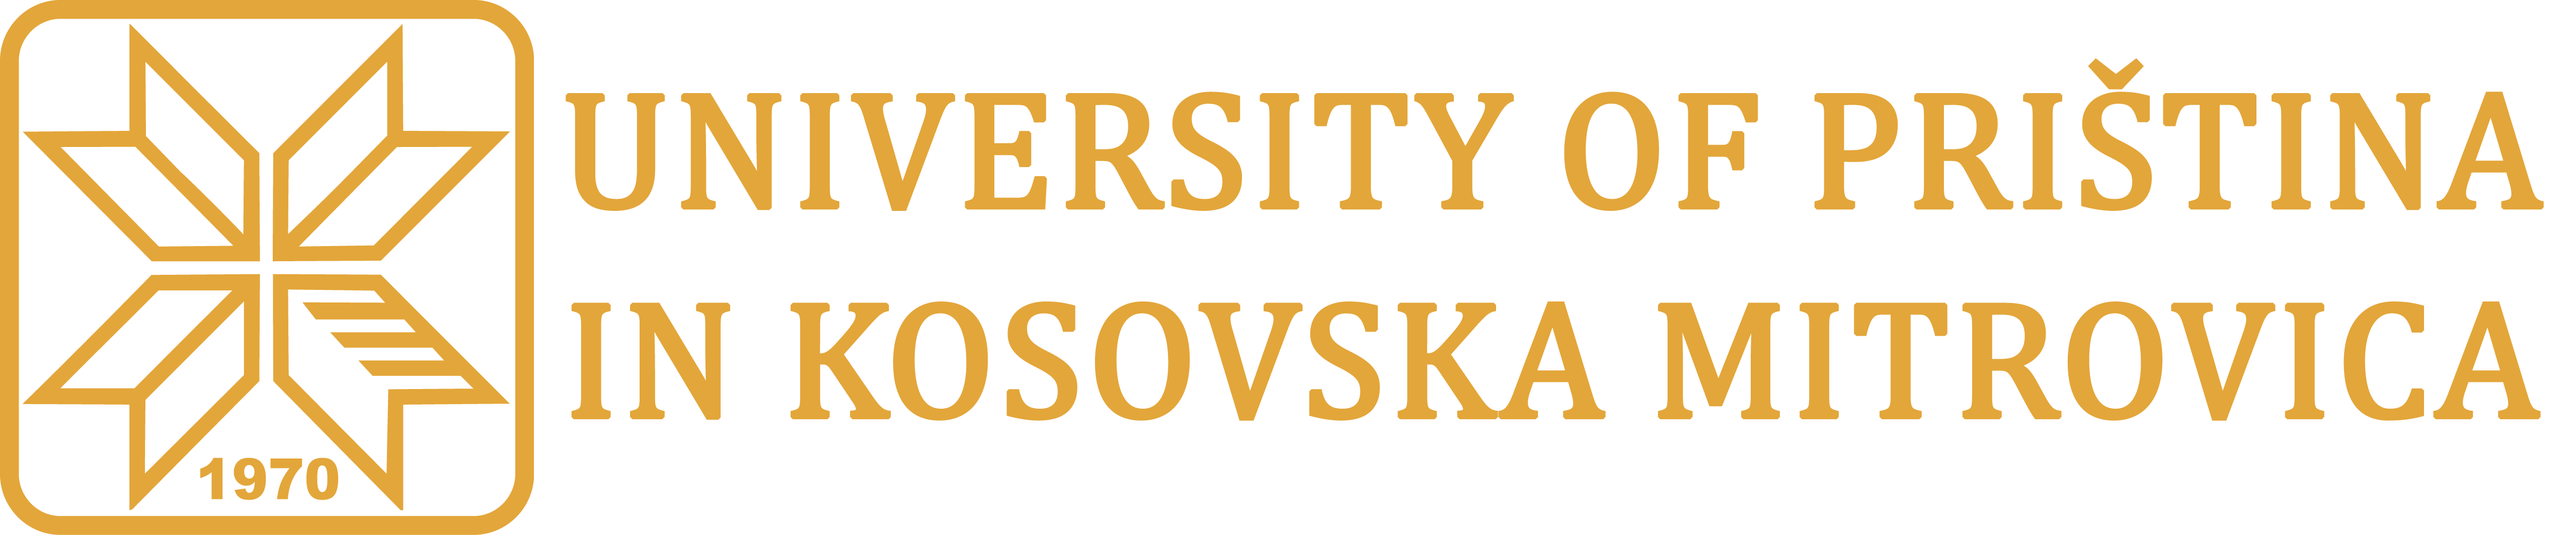 Logo with name